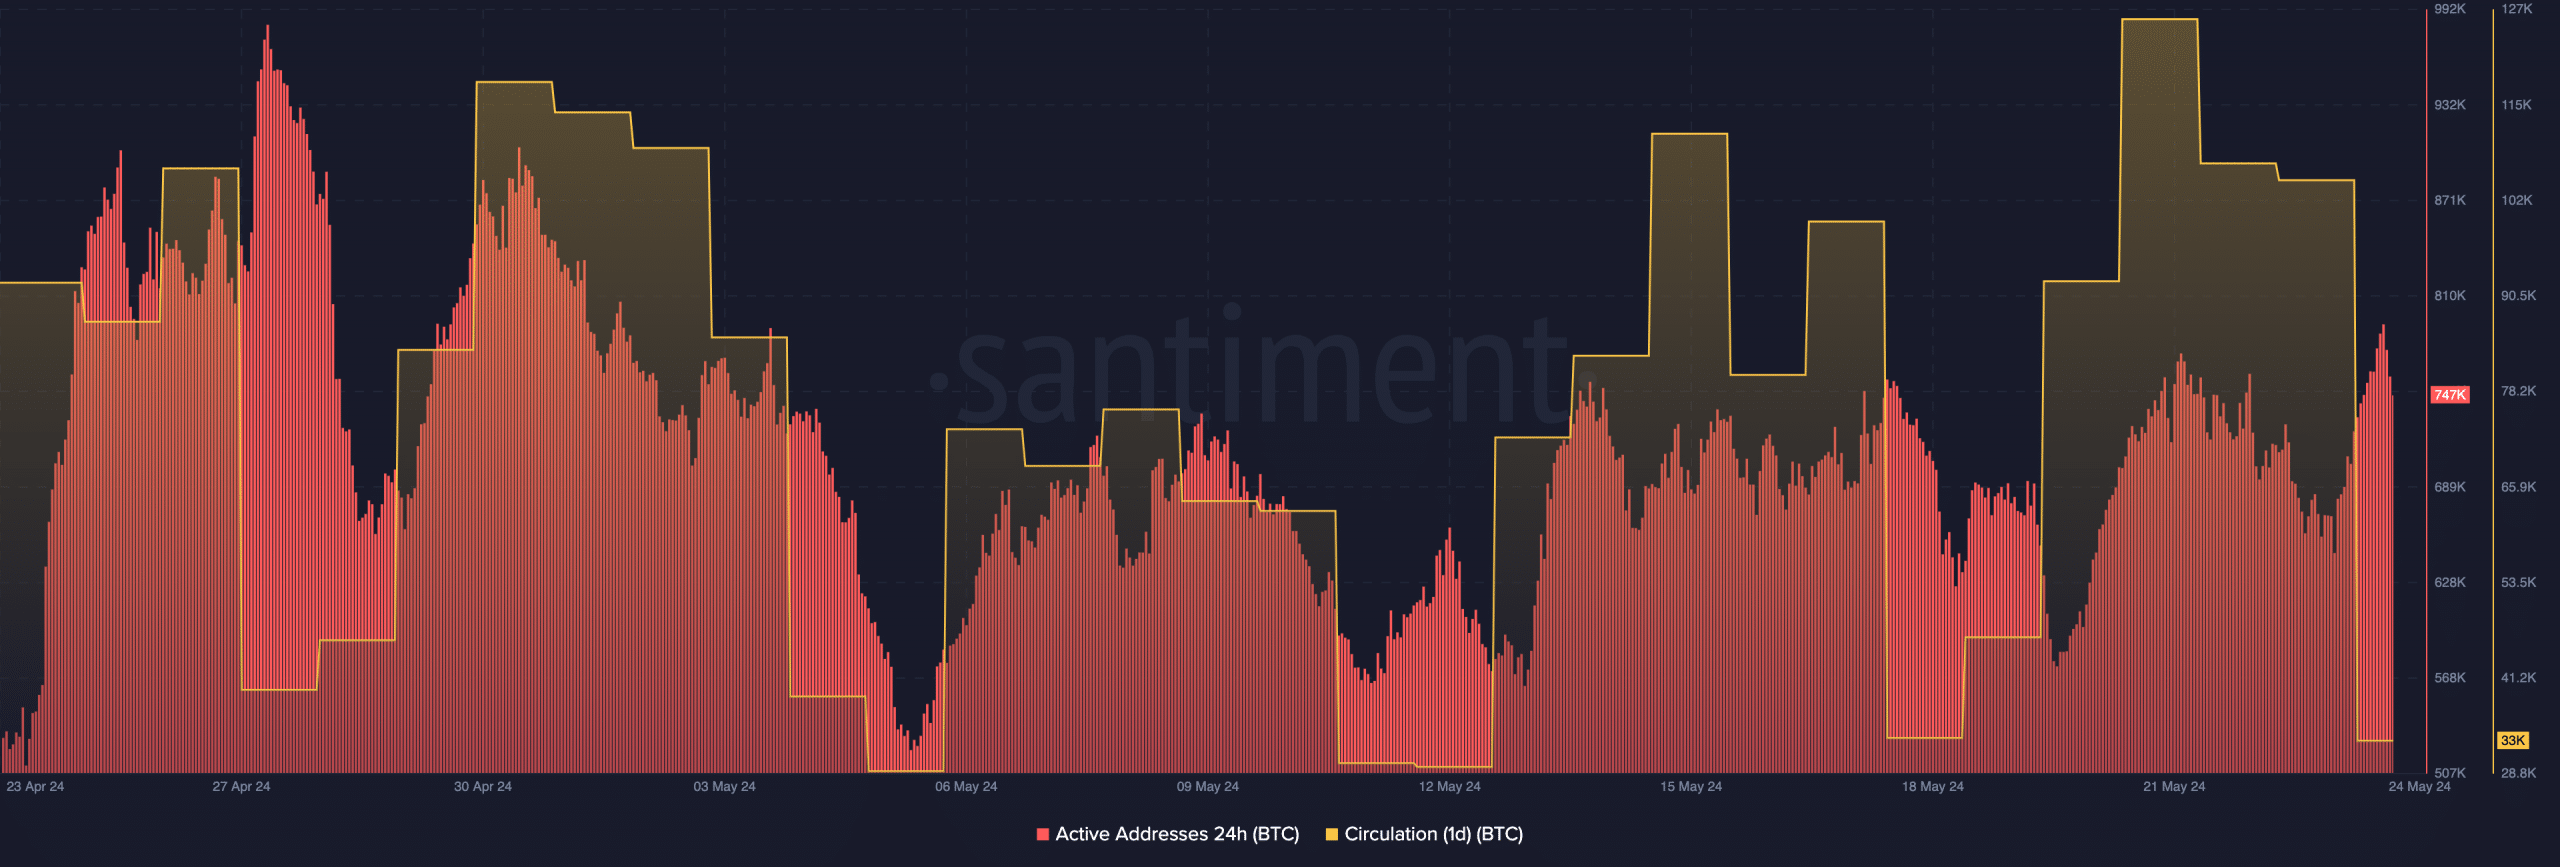 Activity on the Bitcoin network is increasing